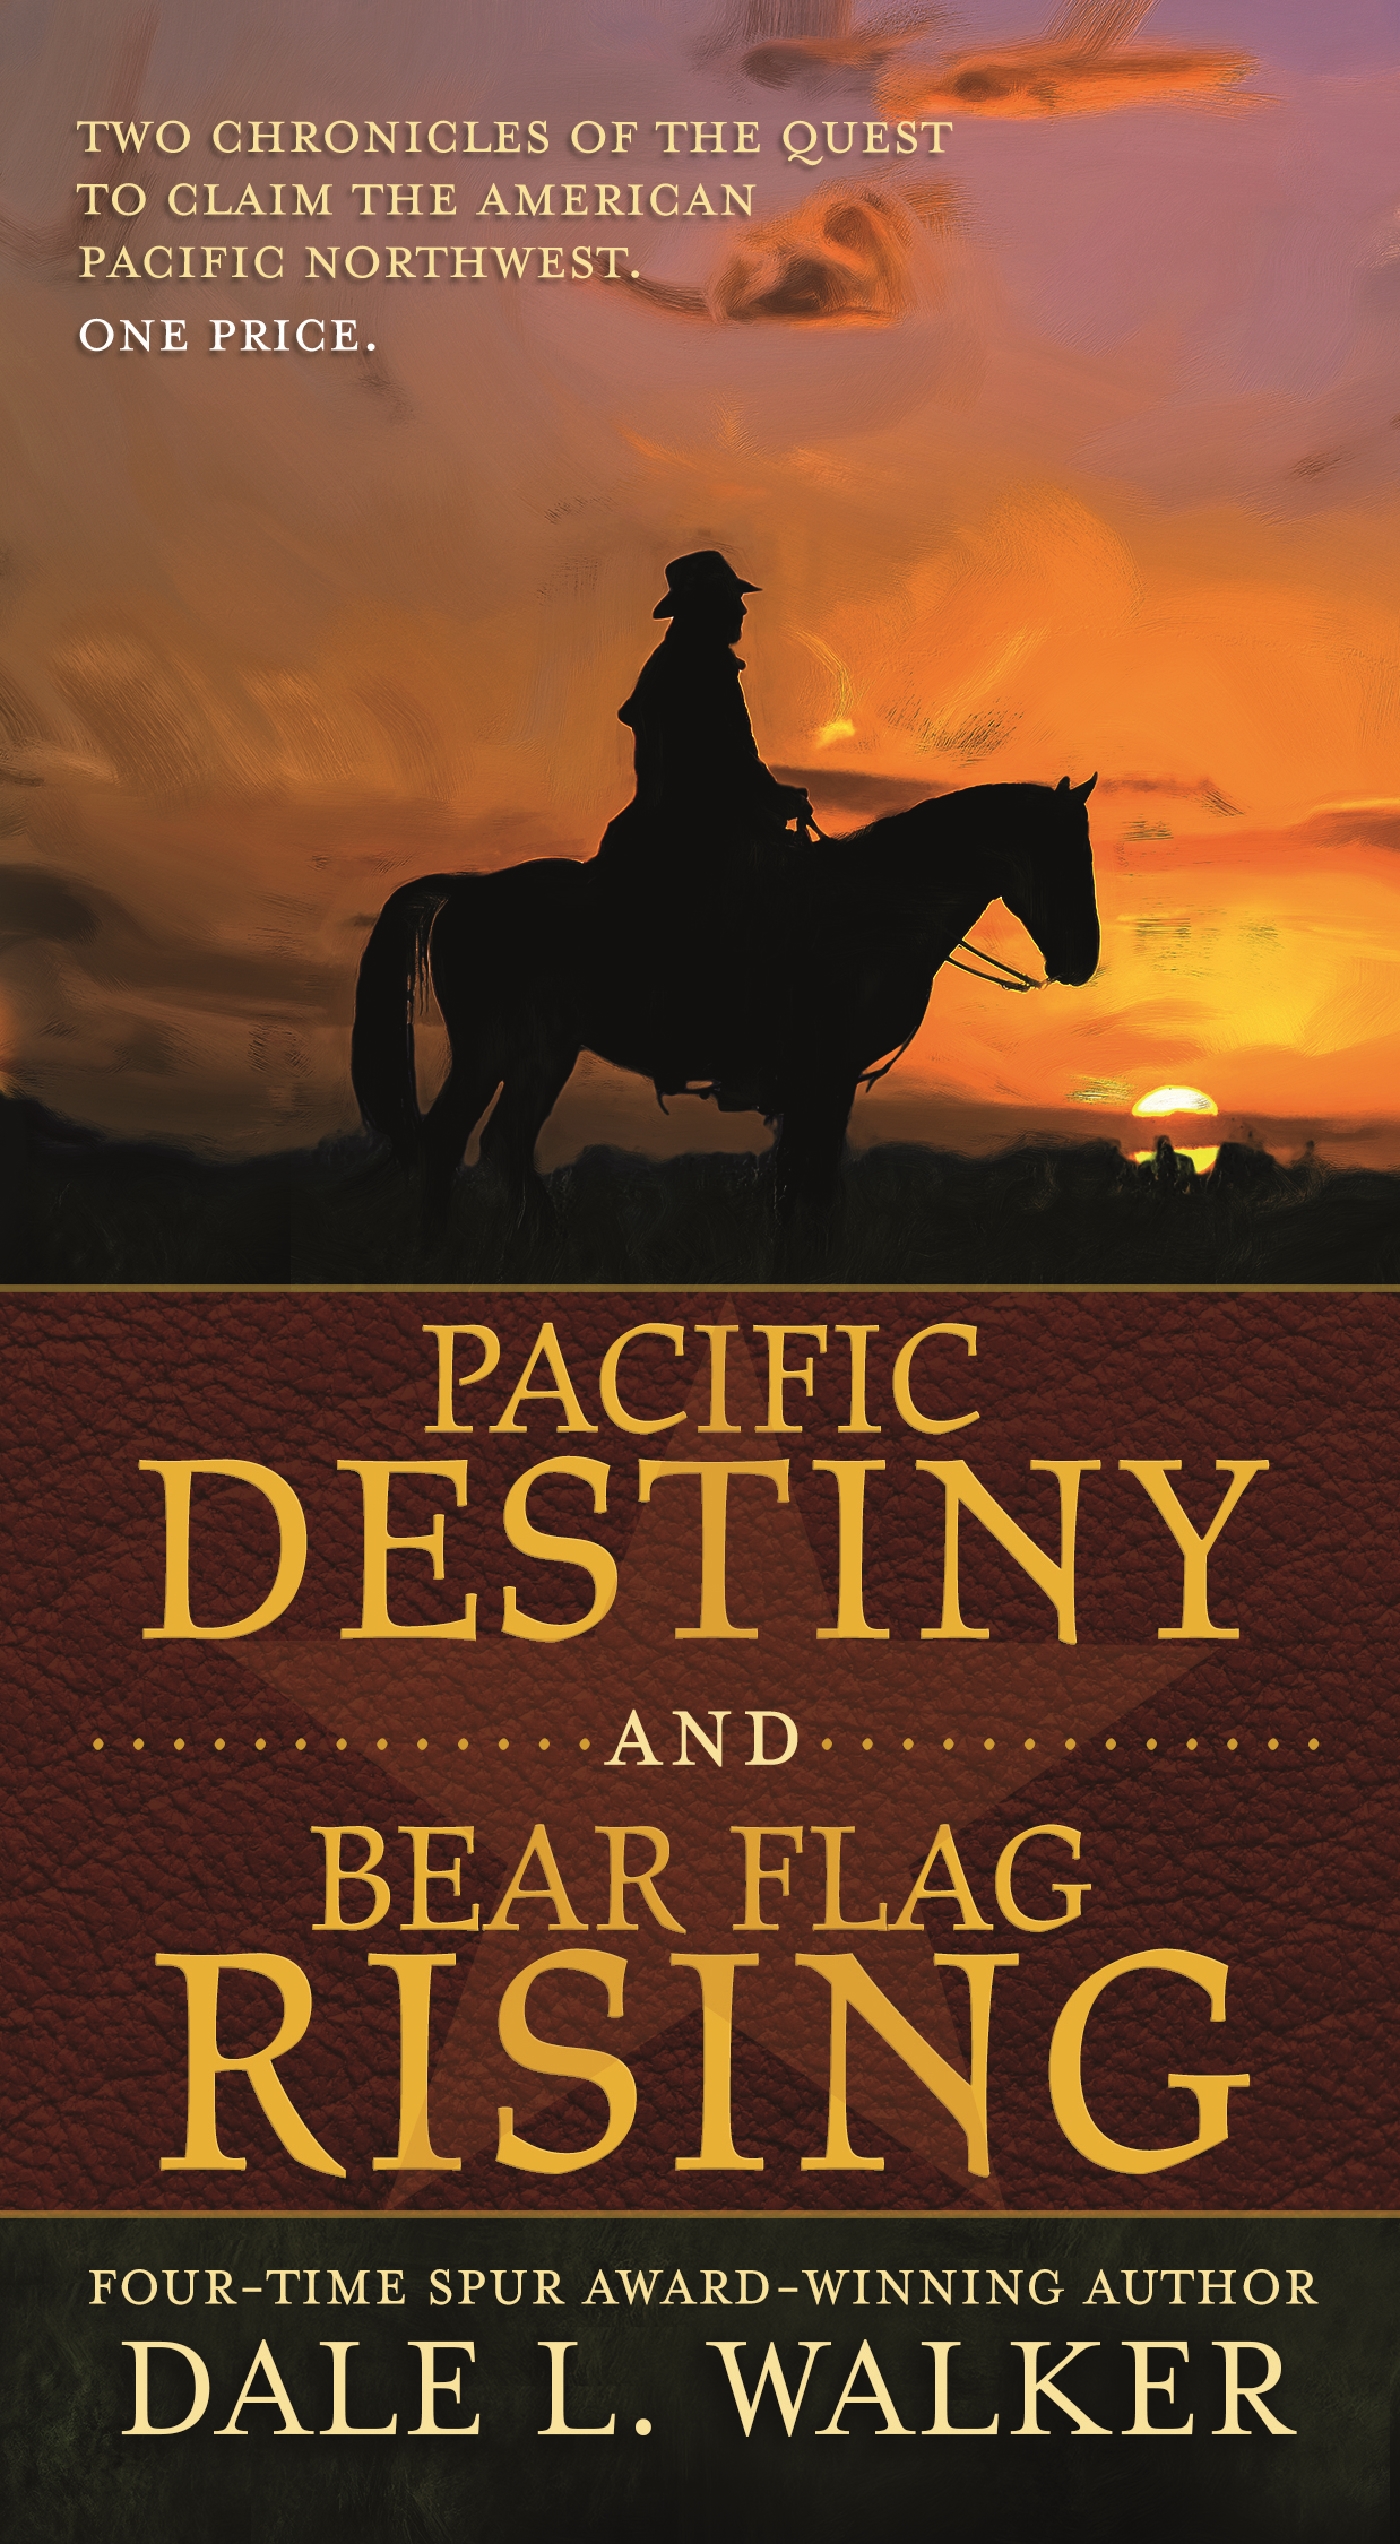 Pacific Destiny and Bear Flag Rising : Two Chronicles of the Quest to Claim the American Pacific Northwest by Dale L. Walker